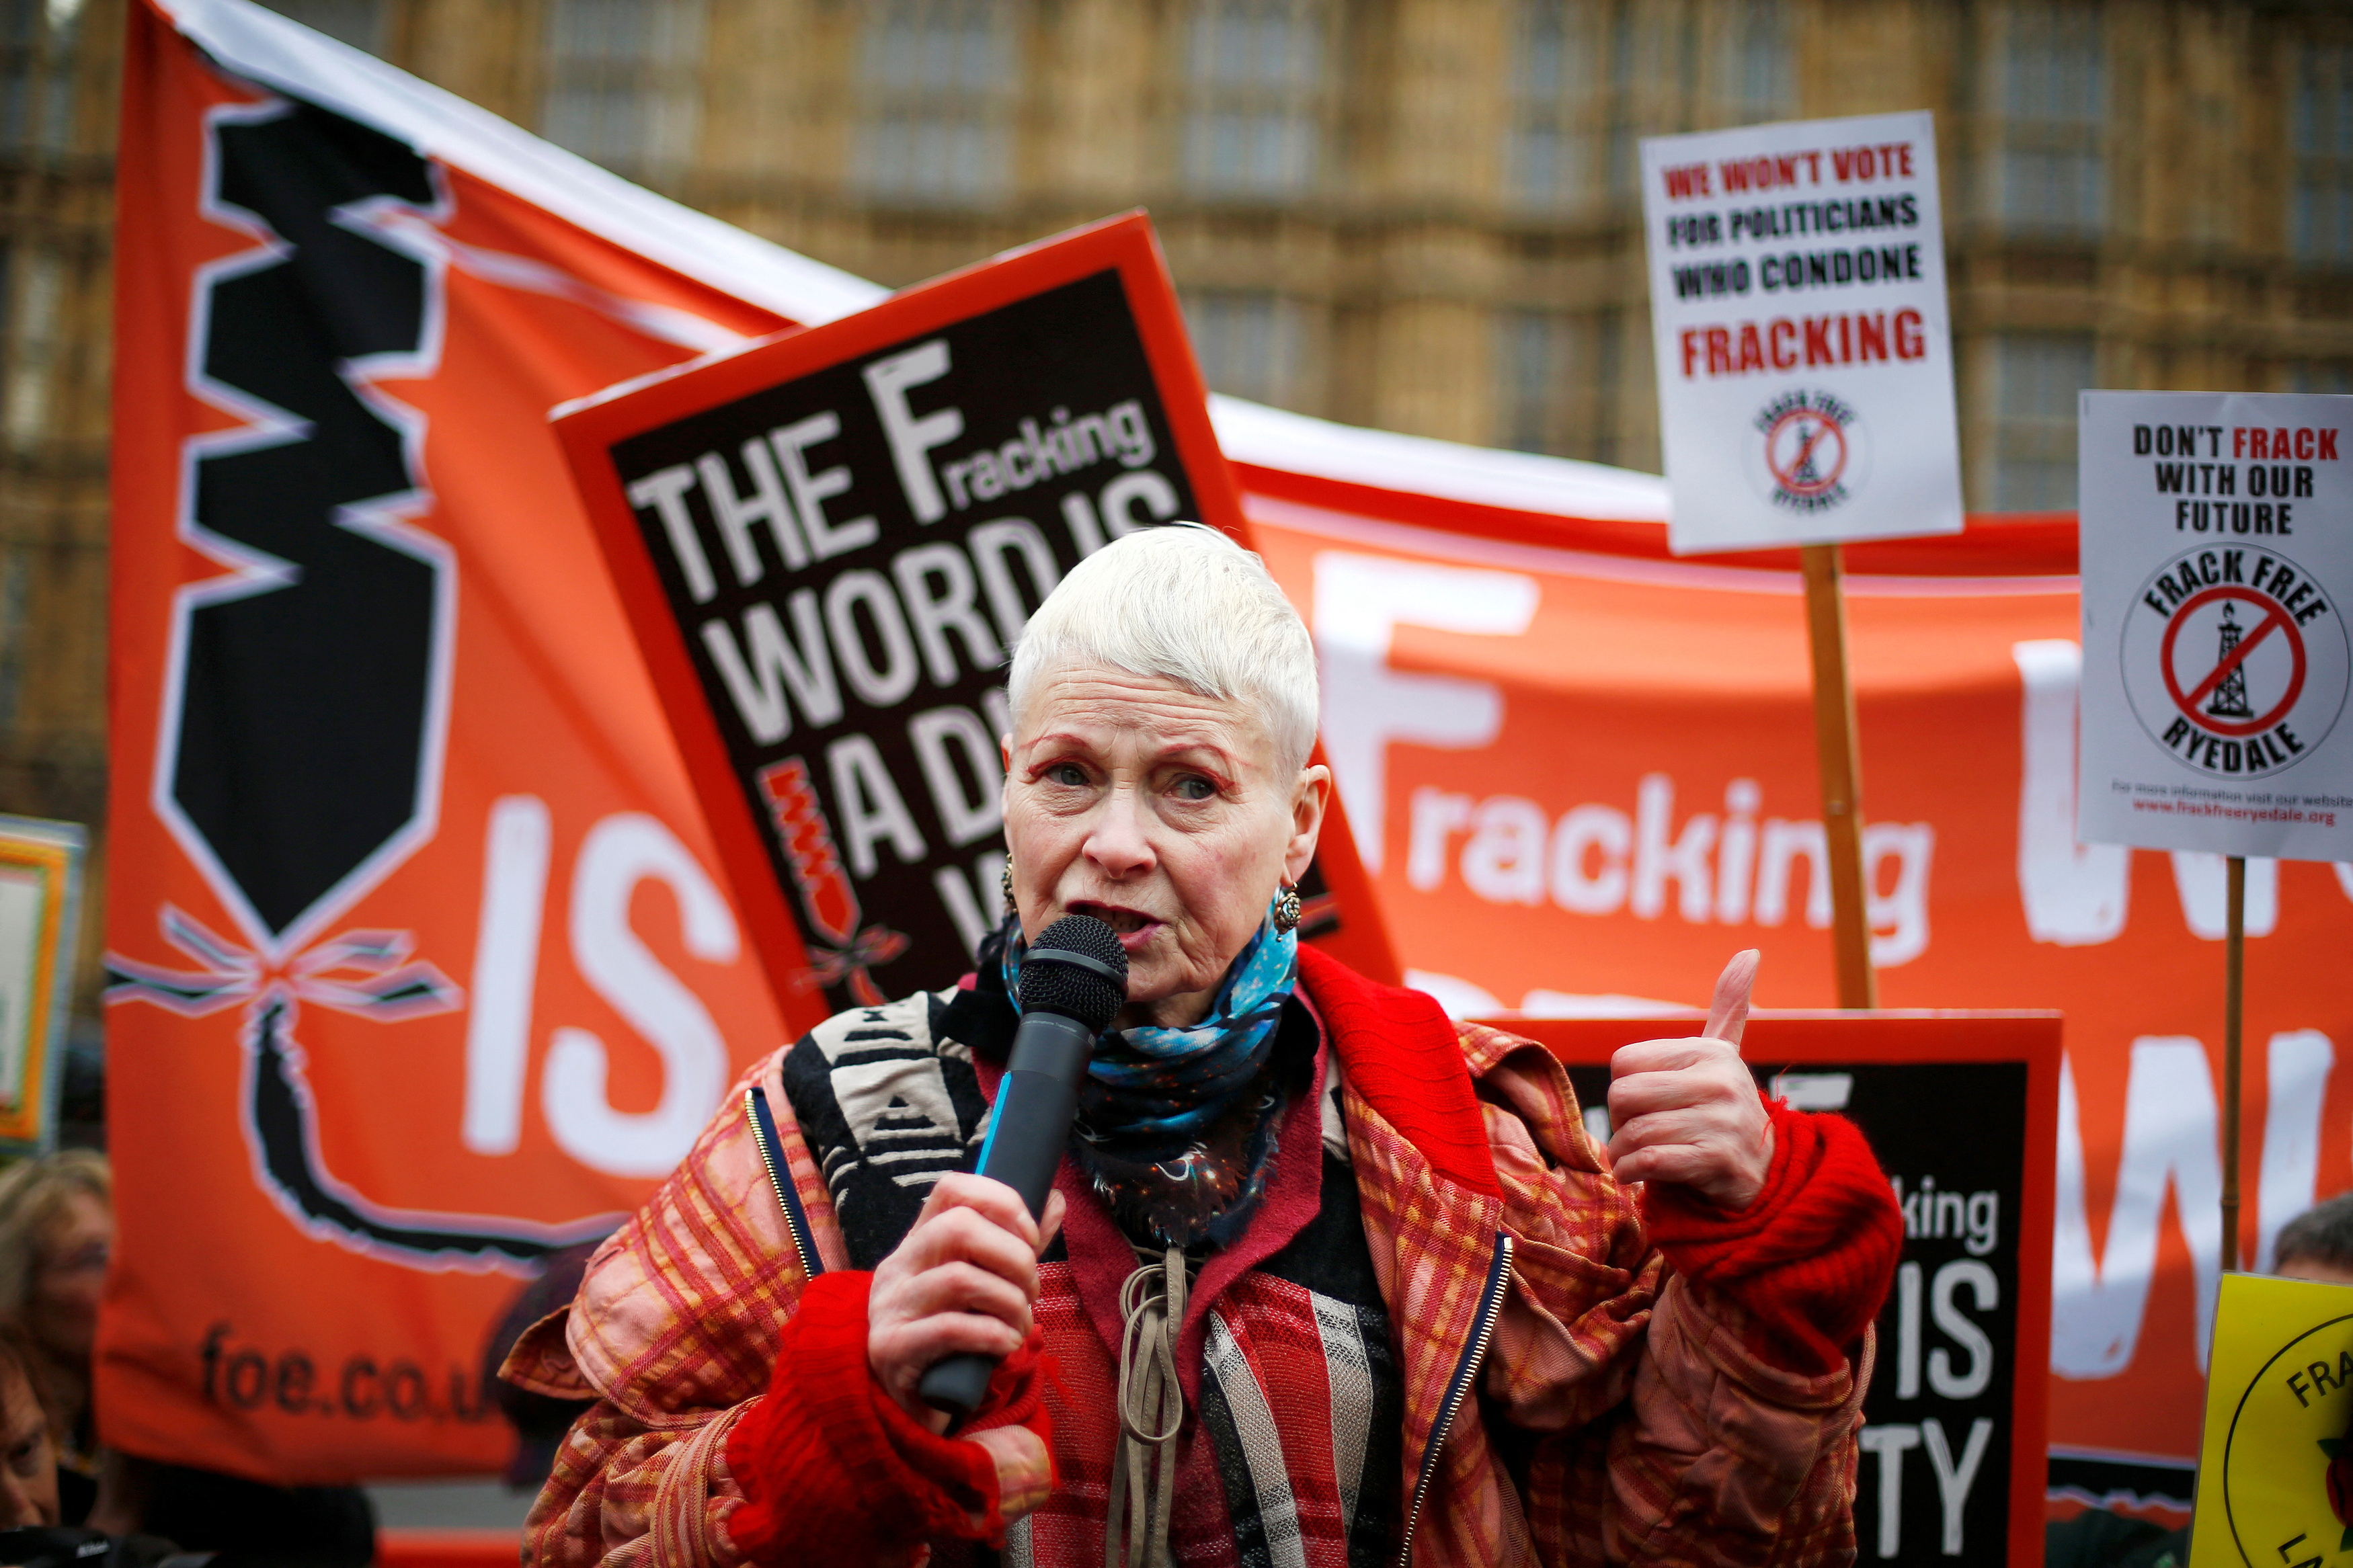 Vivienne Westwood speaks at a protest against fracking outside the Houses of Parliament in Westminster,  January 26, 2015. Reuters/Andrew Winning/File Photo